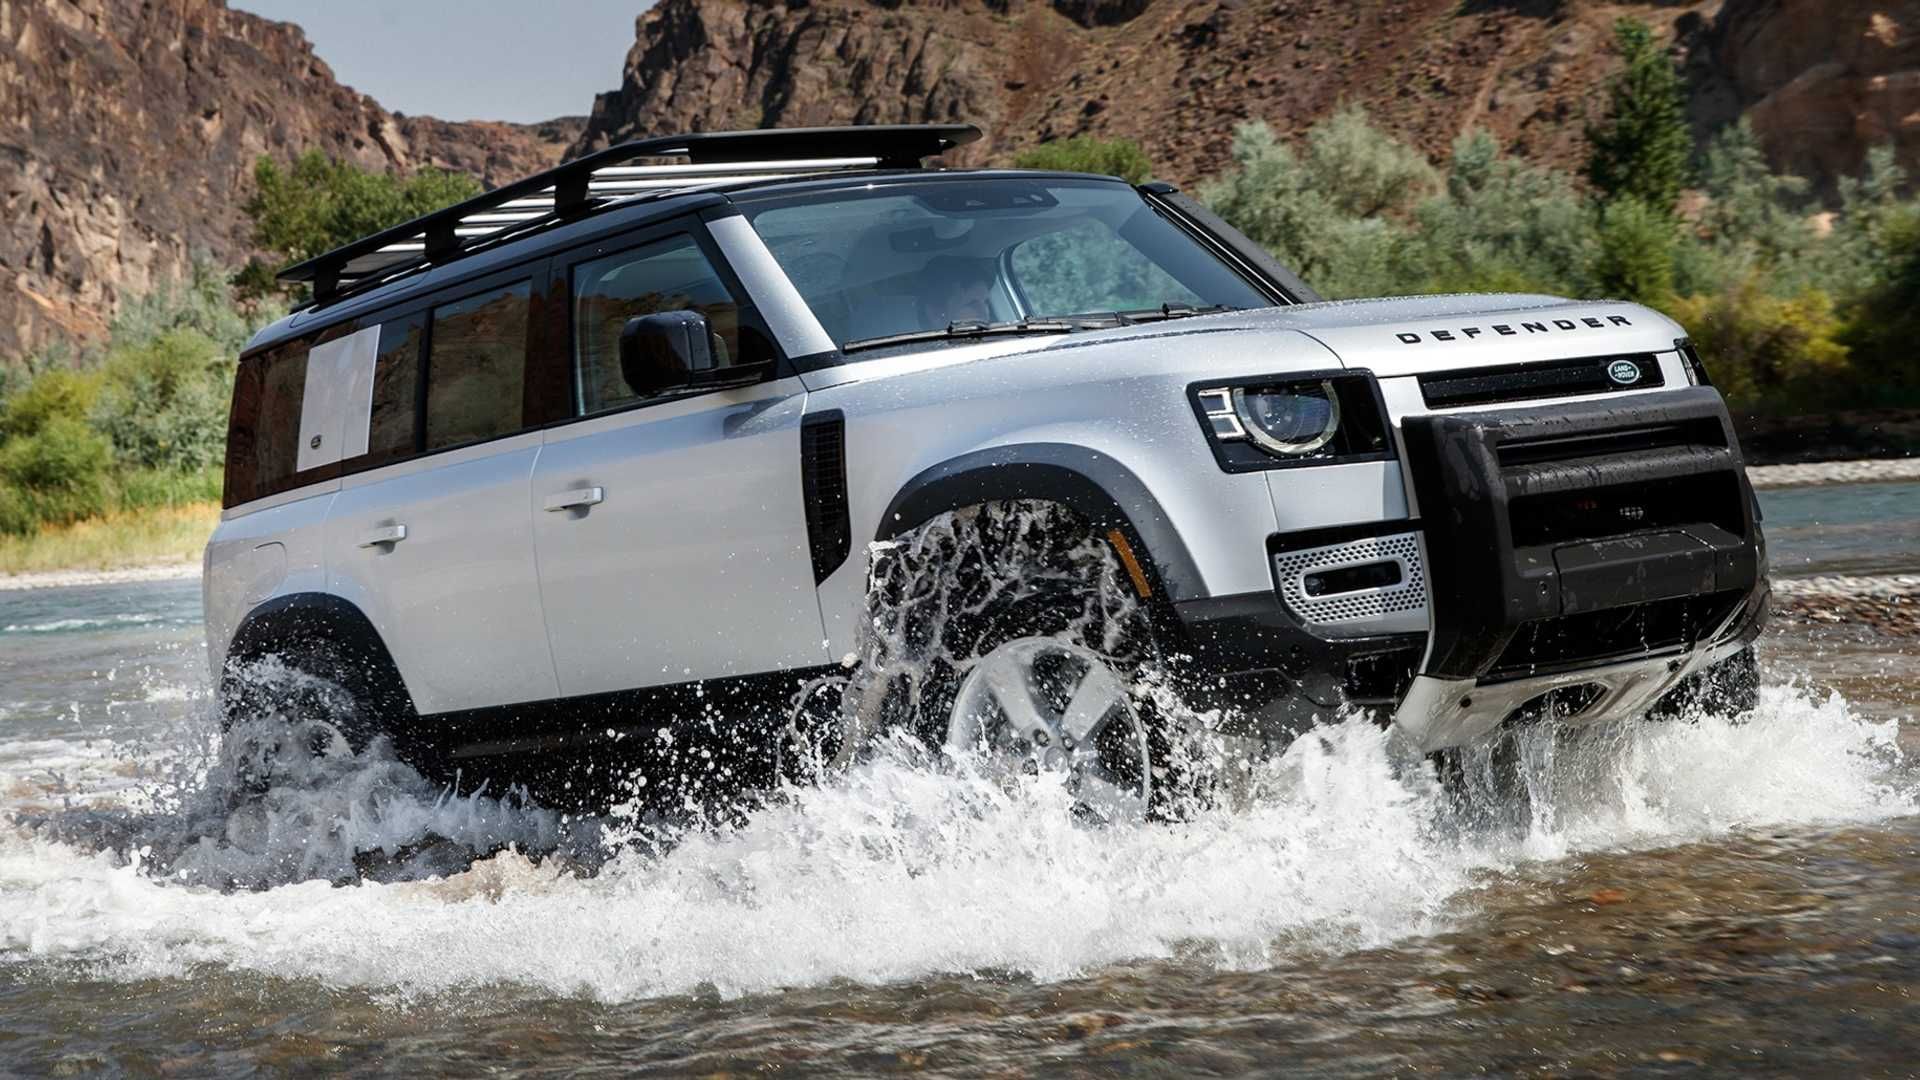 Fuji White 2020 Land Rover Defender driving across a river